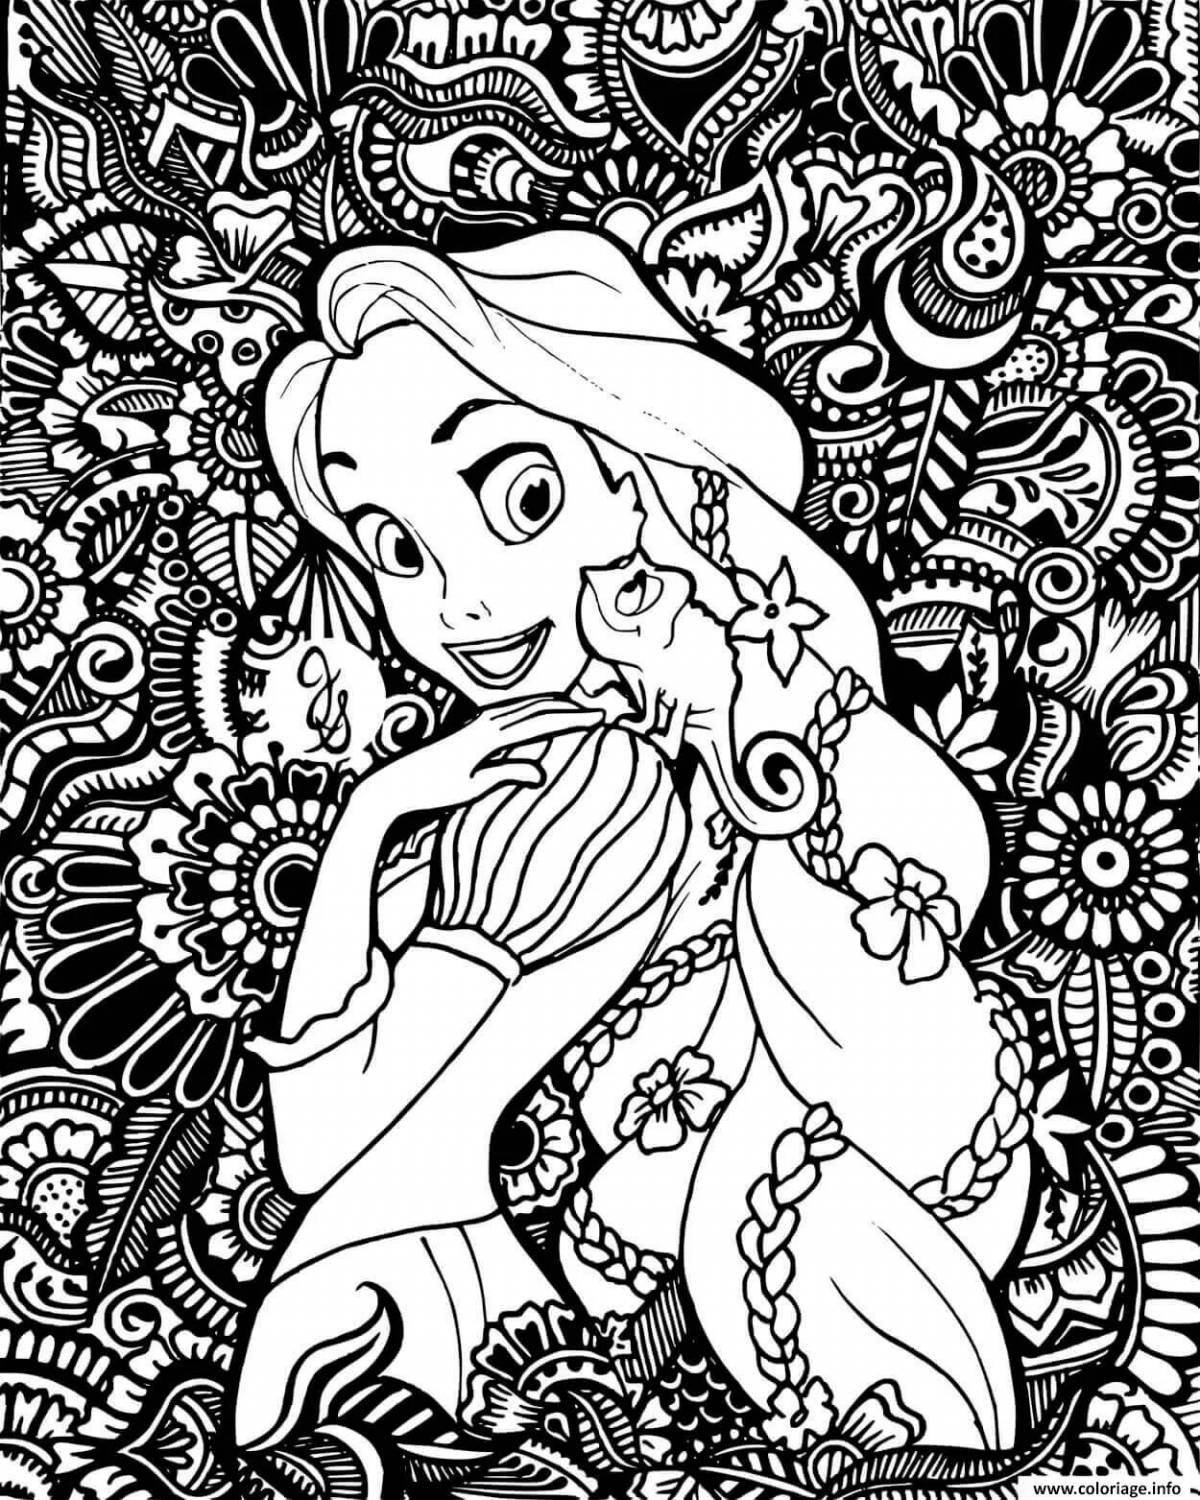 Little coloring book for girls